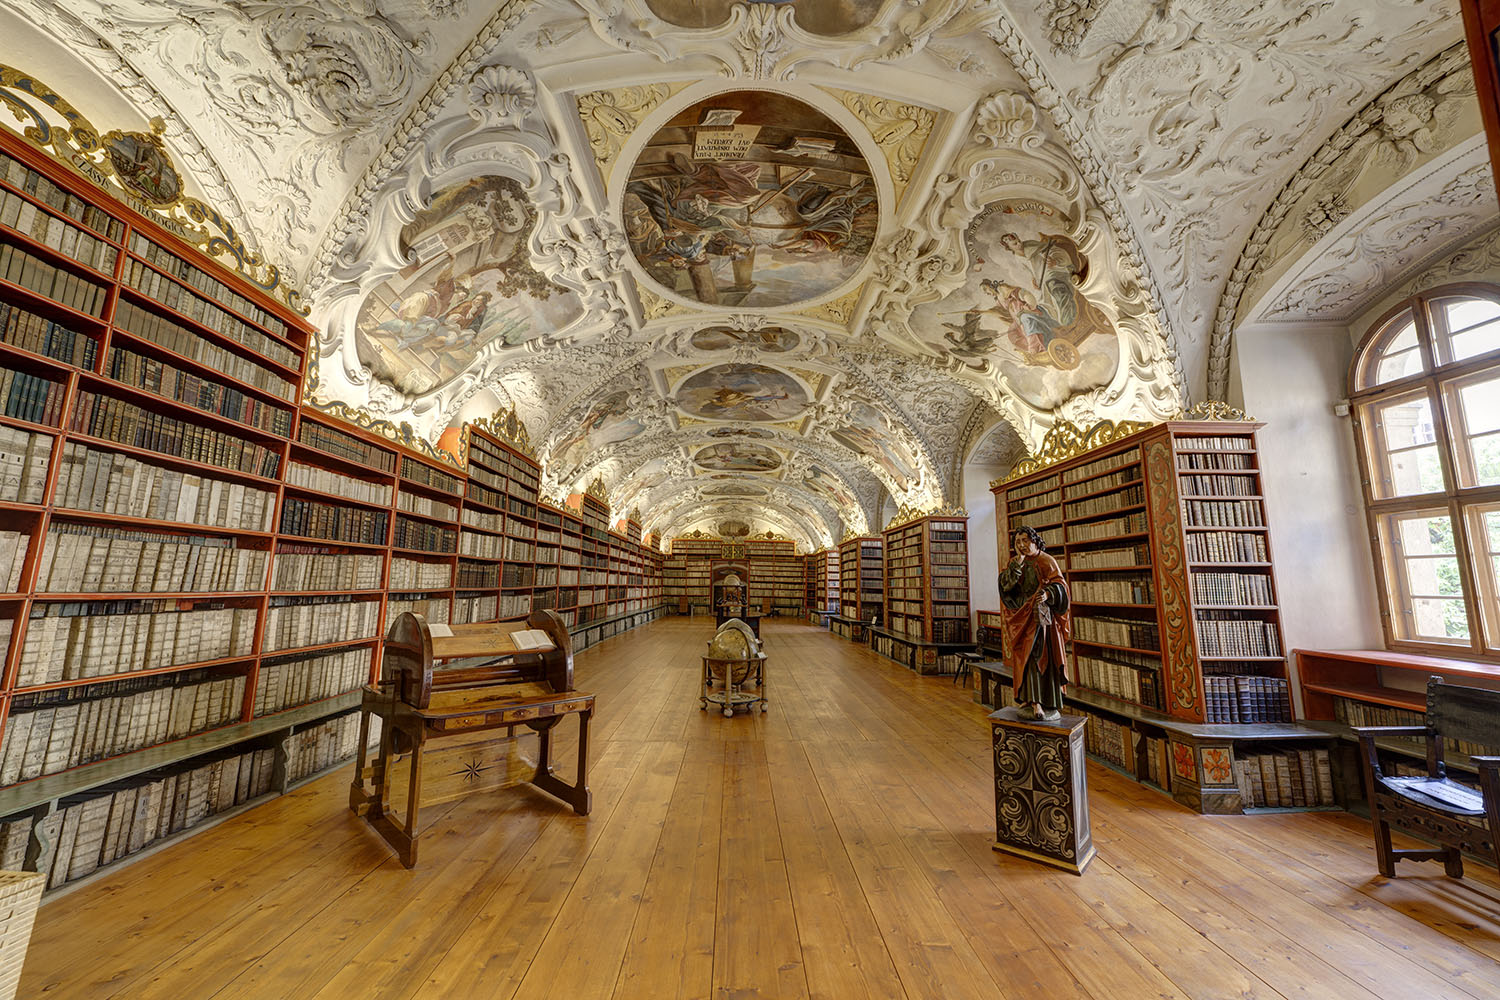 The Theological Hall in Strahov monastery in Prague